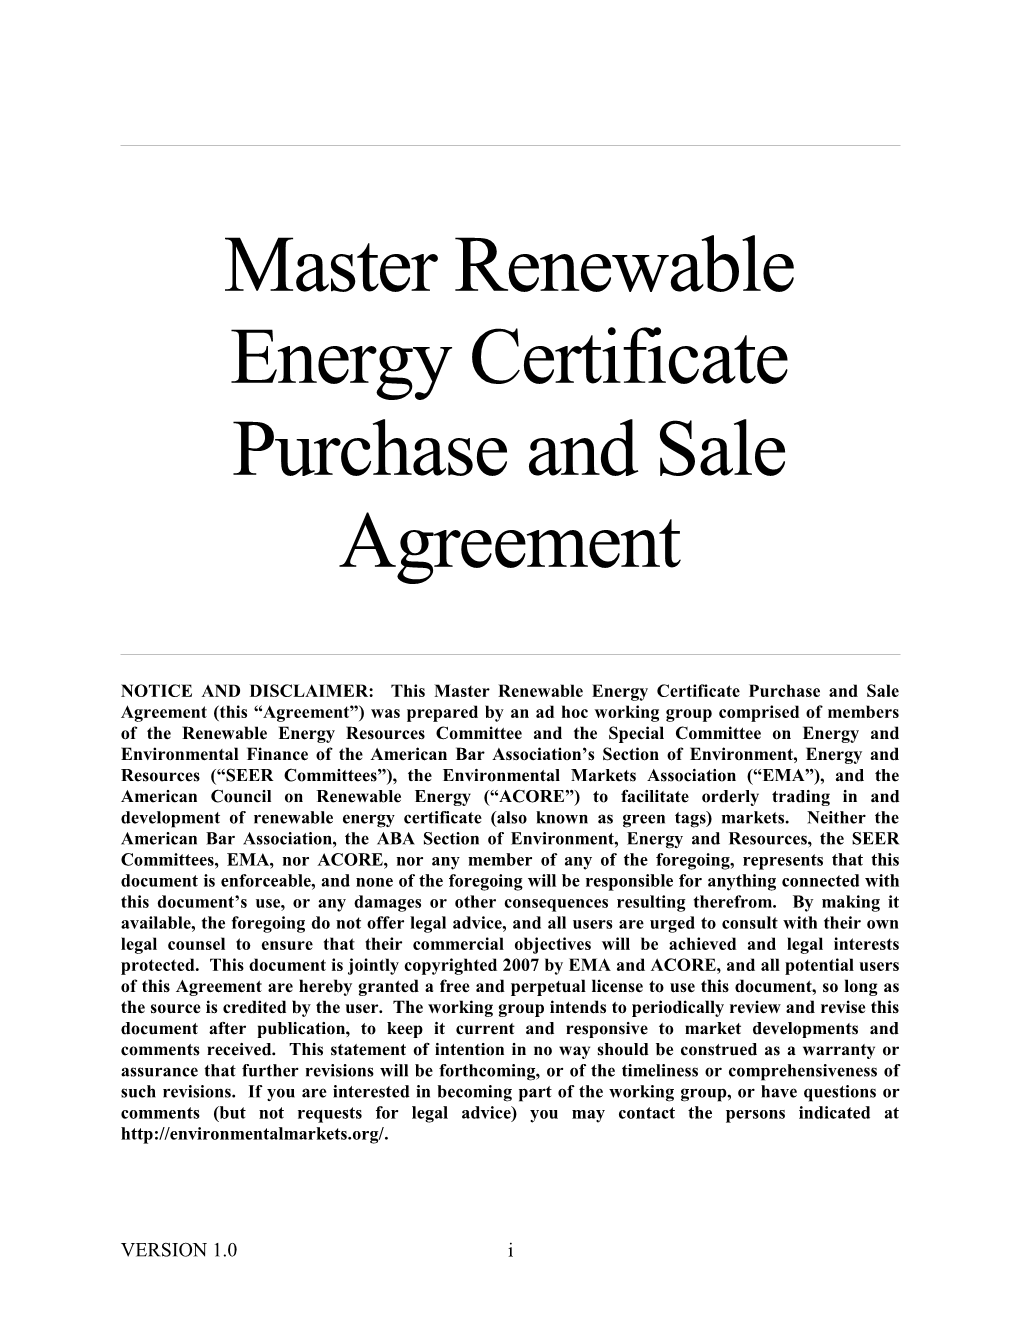 Master Recs Purchase & Sale Agreement